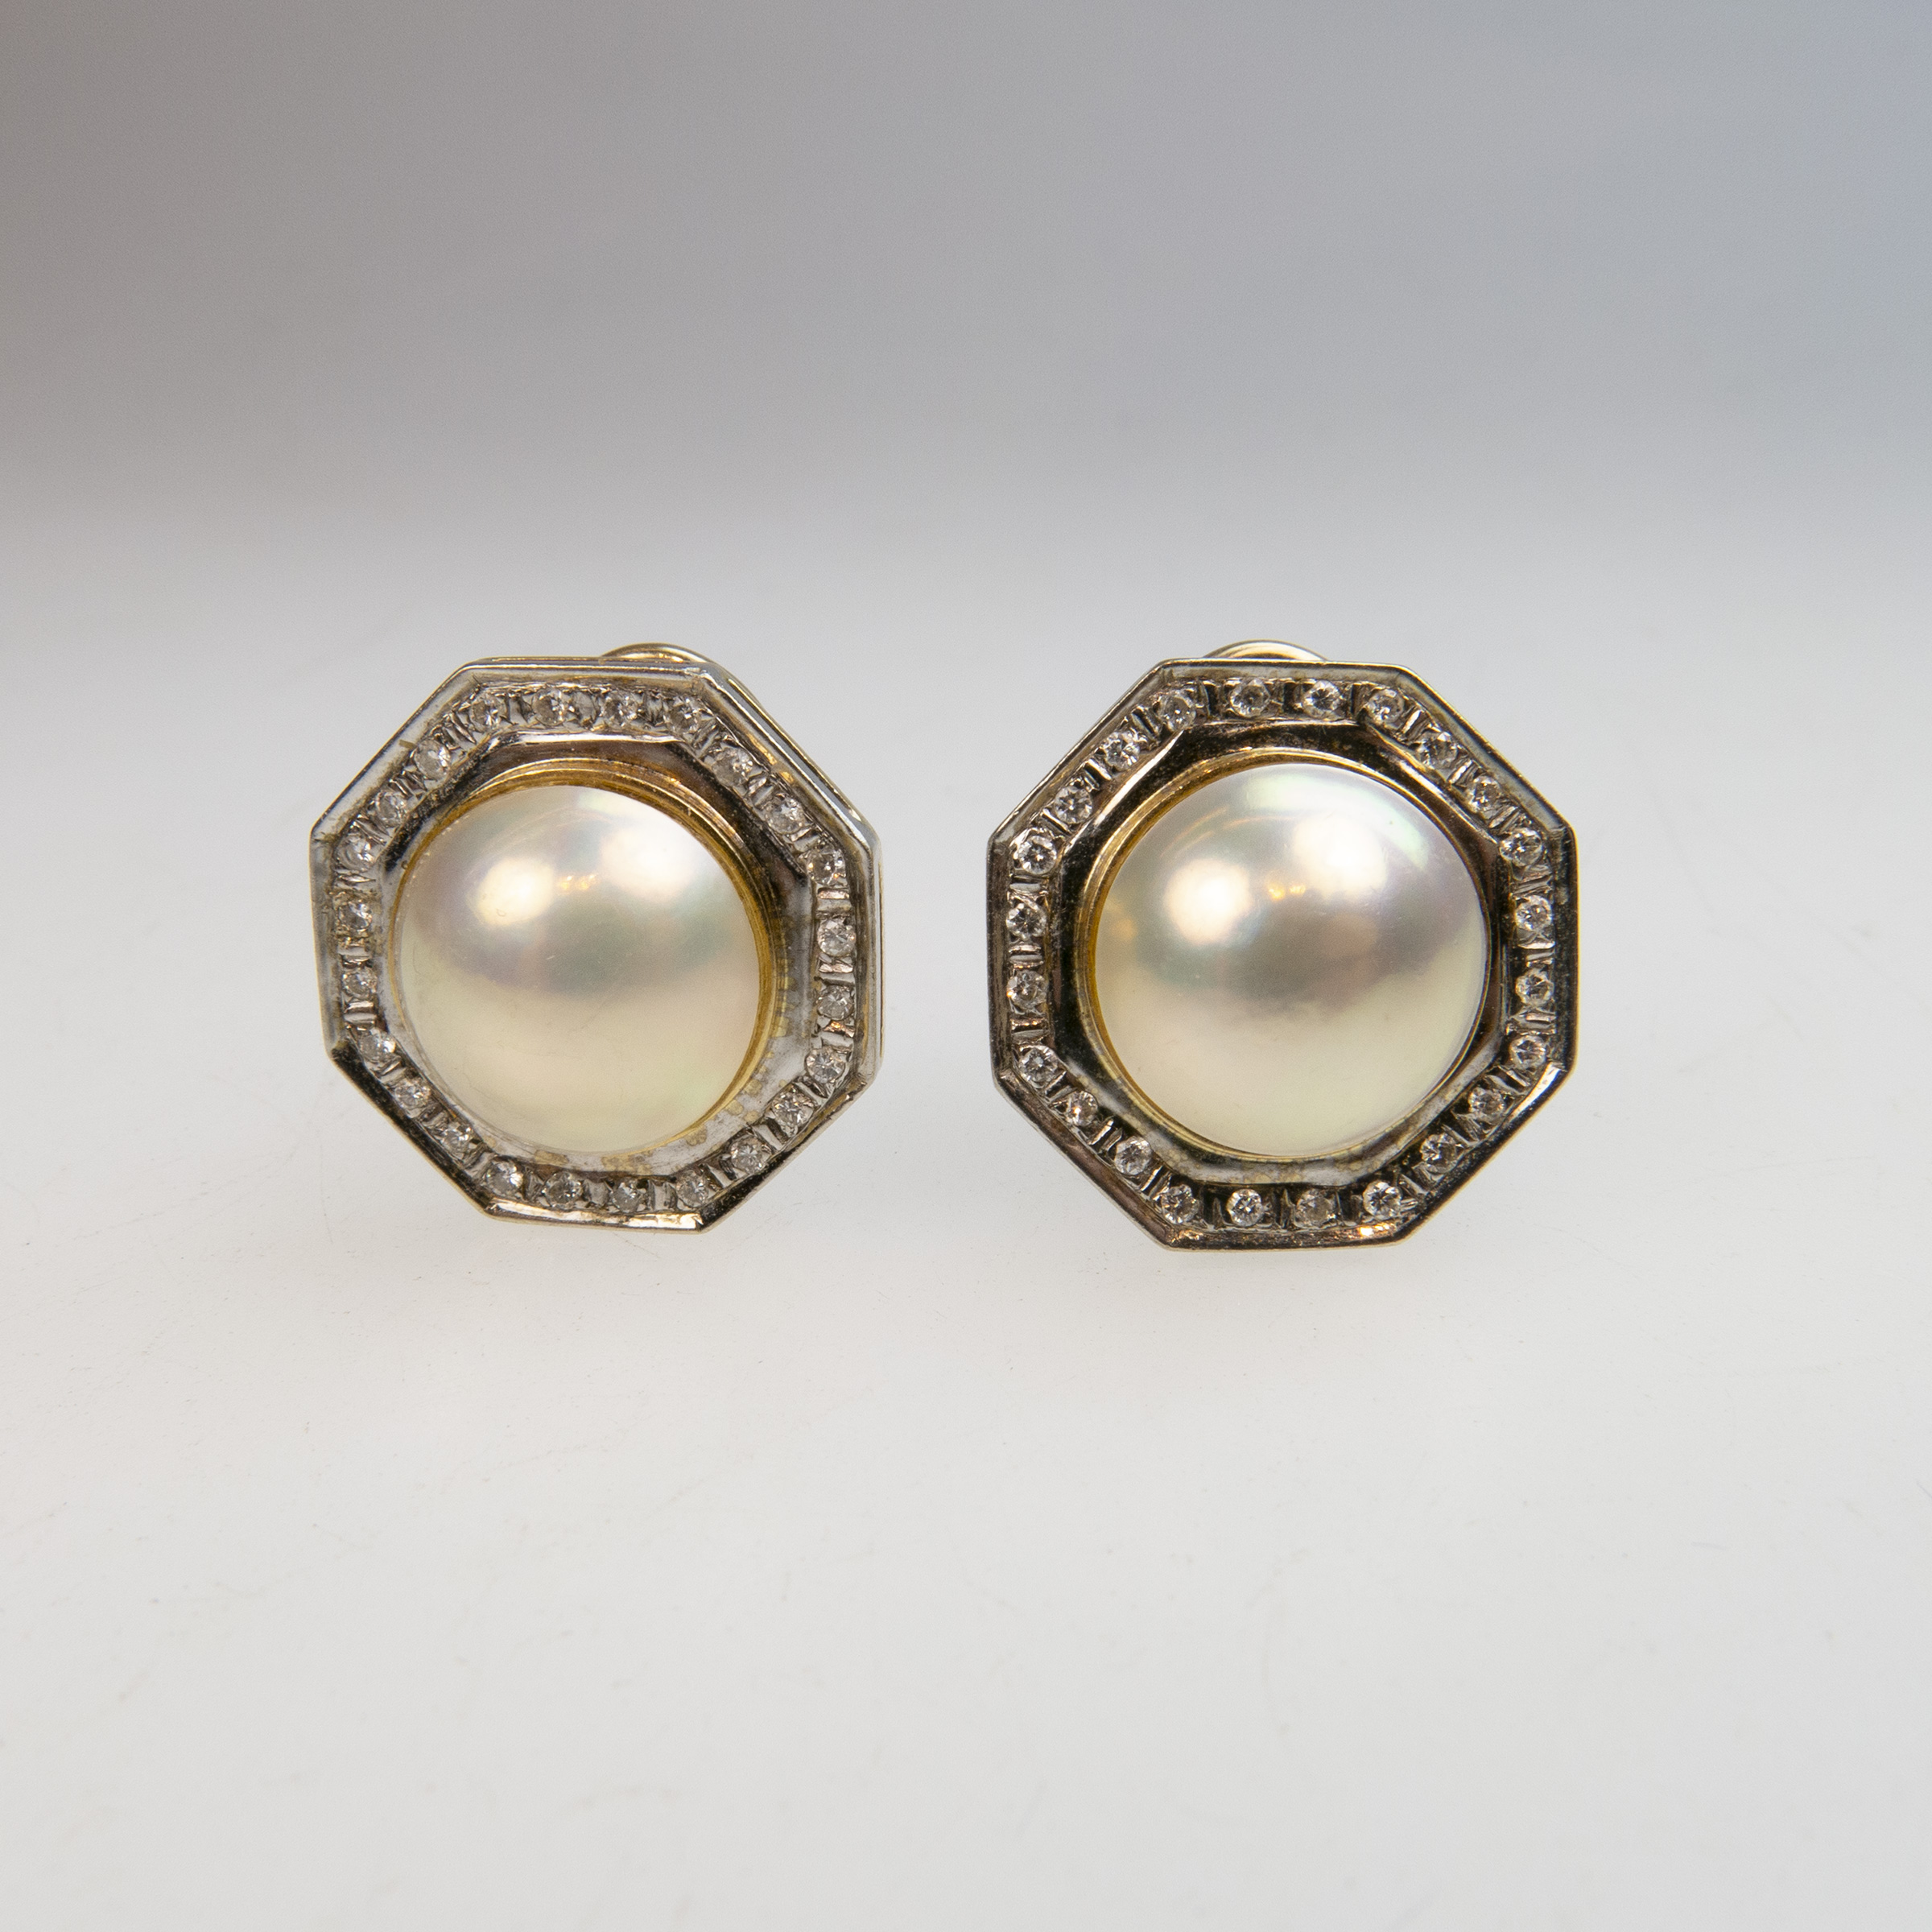 Pair of 14k Yellow and White Gold Button Earrings